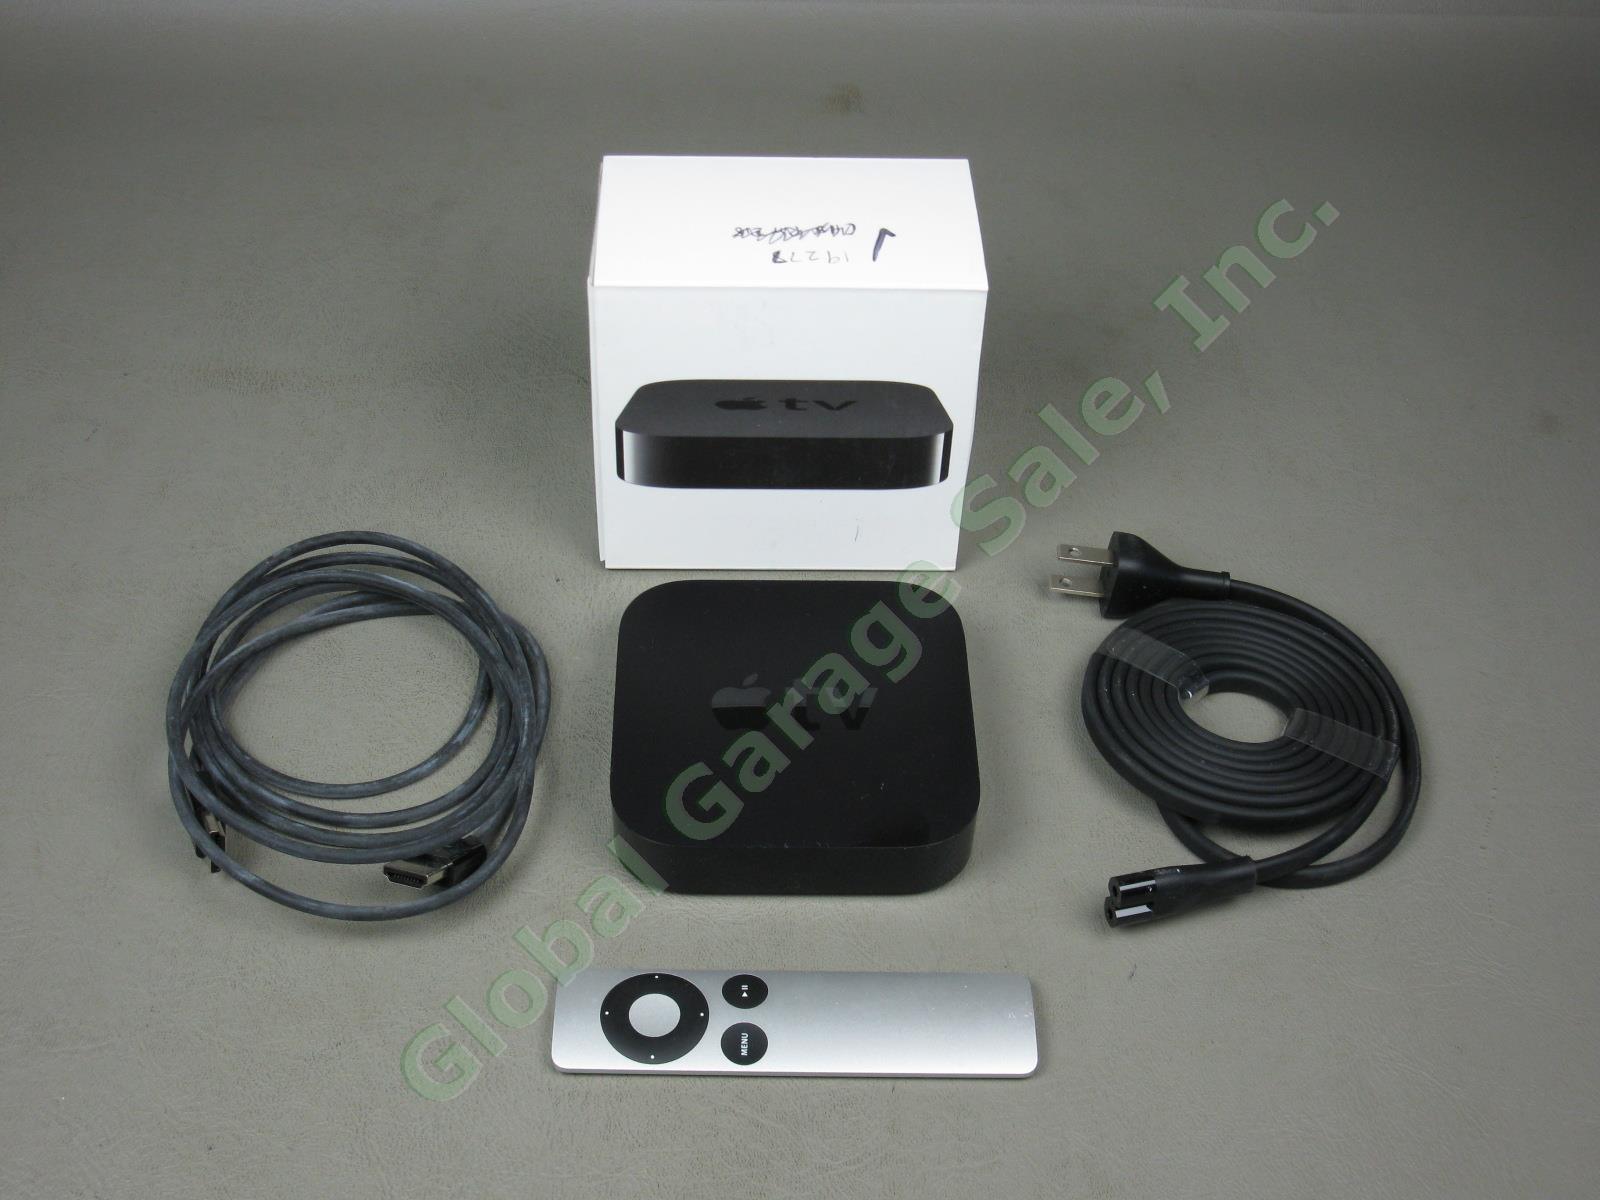 Apple TV 1080p 3rd Gen Generation A1427 MD199LL/A One Owner Box Remote HDMI NR!